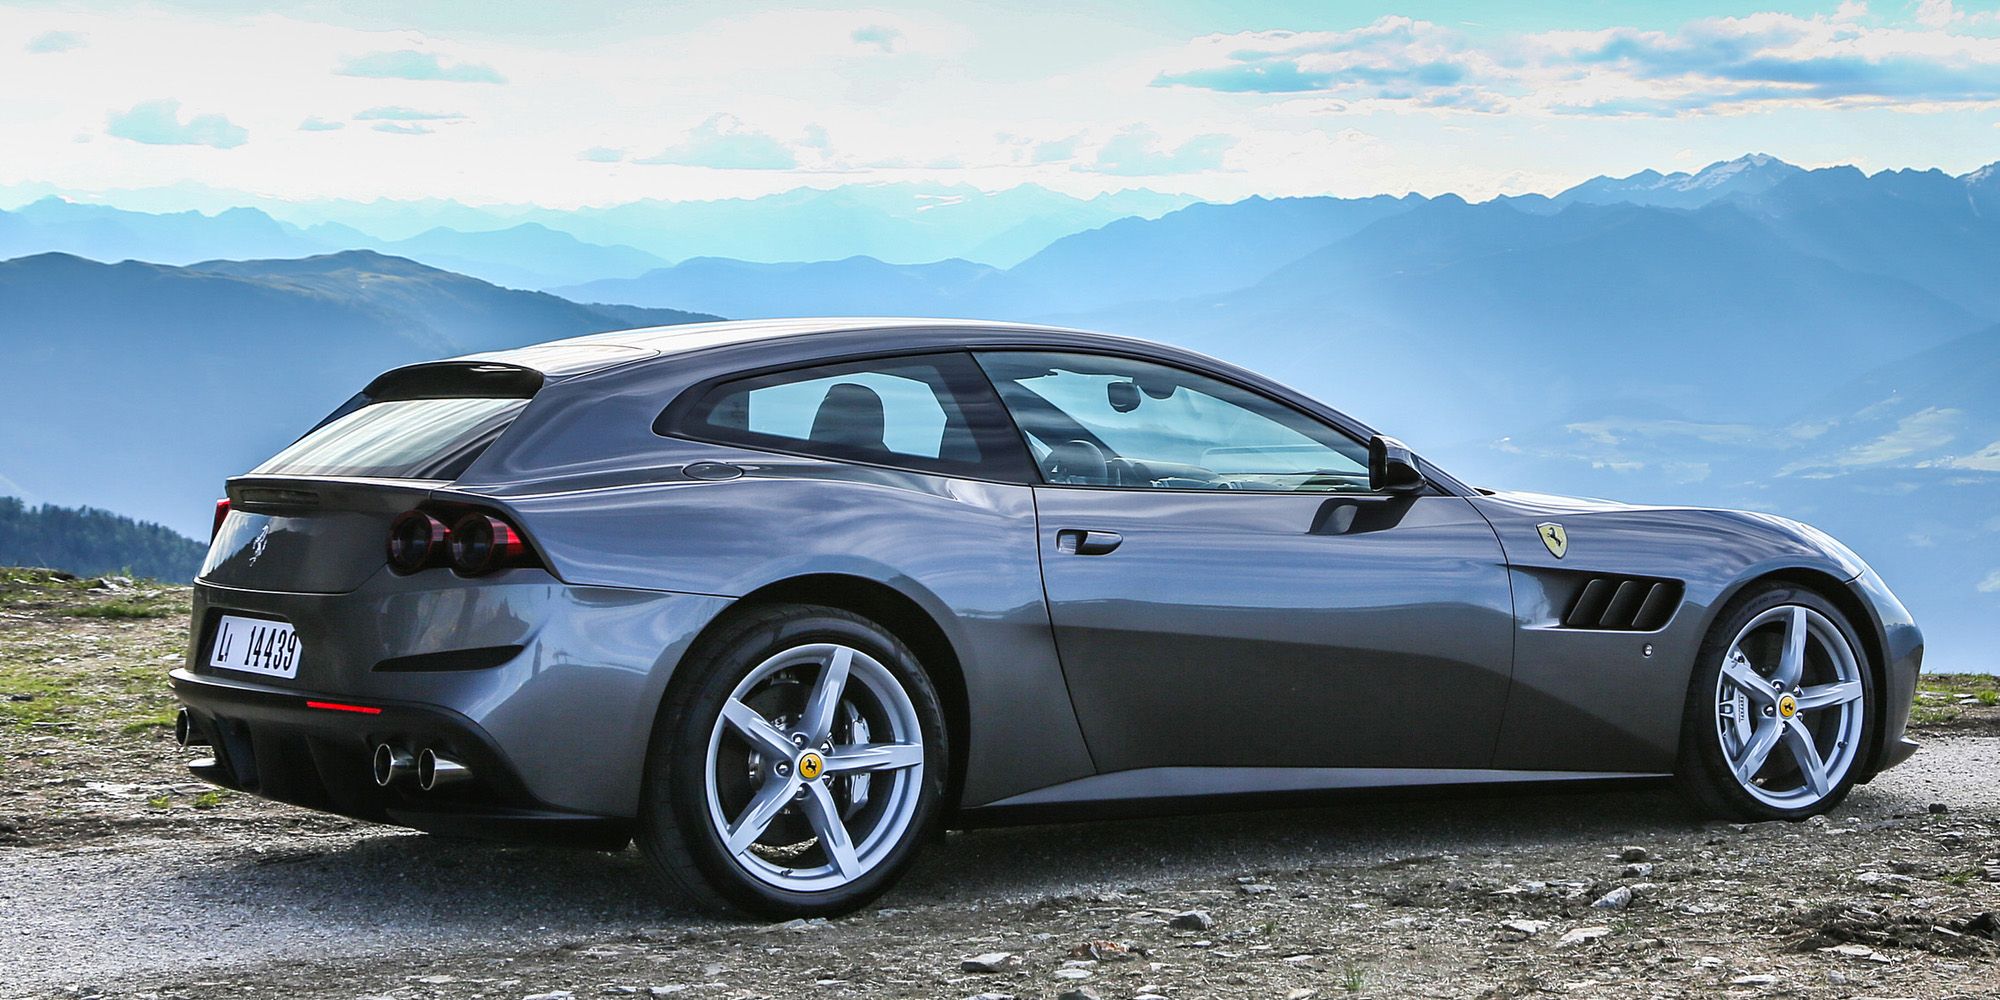 Rear 3/4 view of the GTC4Lusso